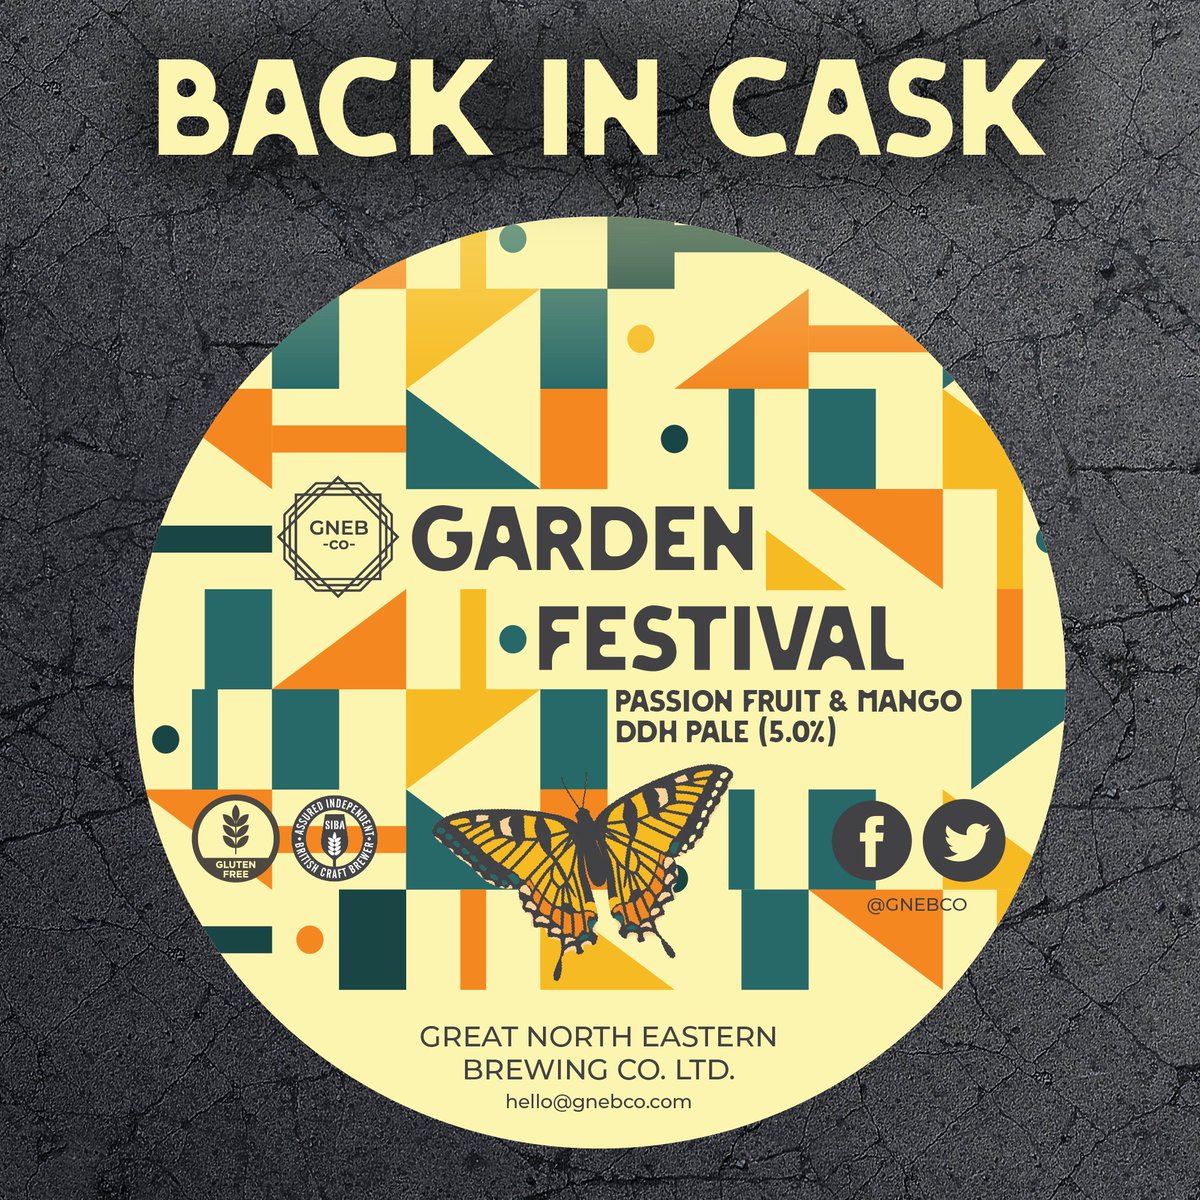 Back in cask by popular demand...Garden Festival 5.0%: Unfiltered double dry hopped punchy passionfruit and mango pale ale. Hopped with Equanot and Cashmere and Mosaic. Vegan and Gluten free. Fancy this beer in your pub? call our office on 01914474462 or email hello@gnebco.com